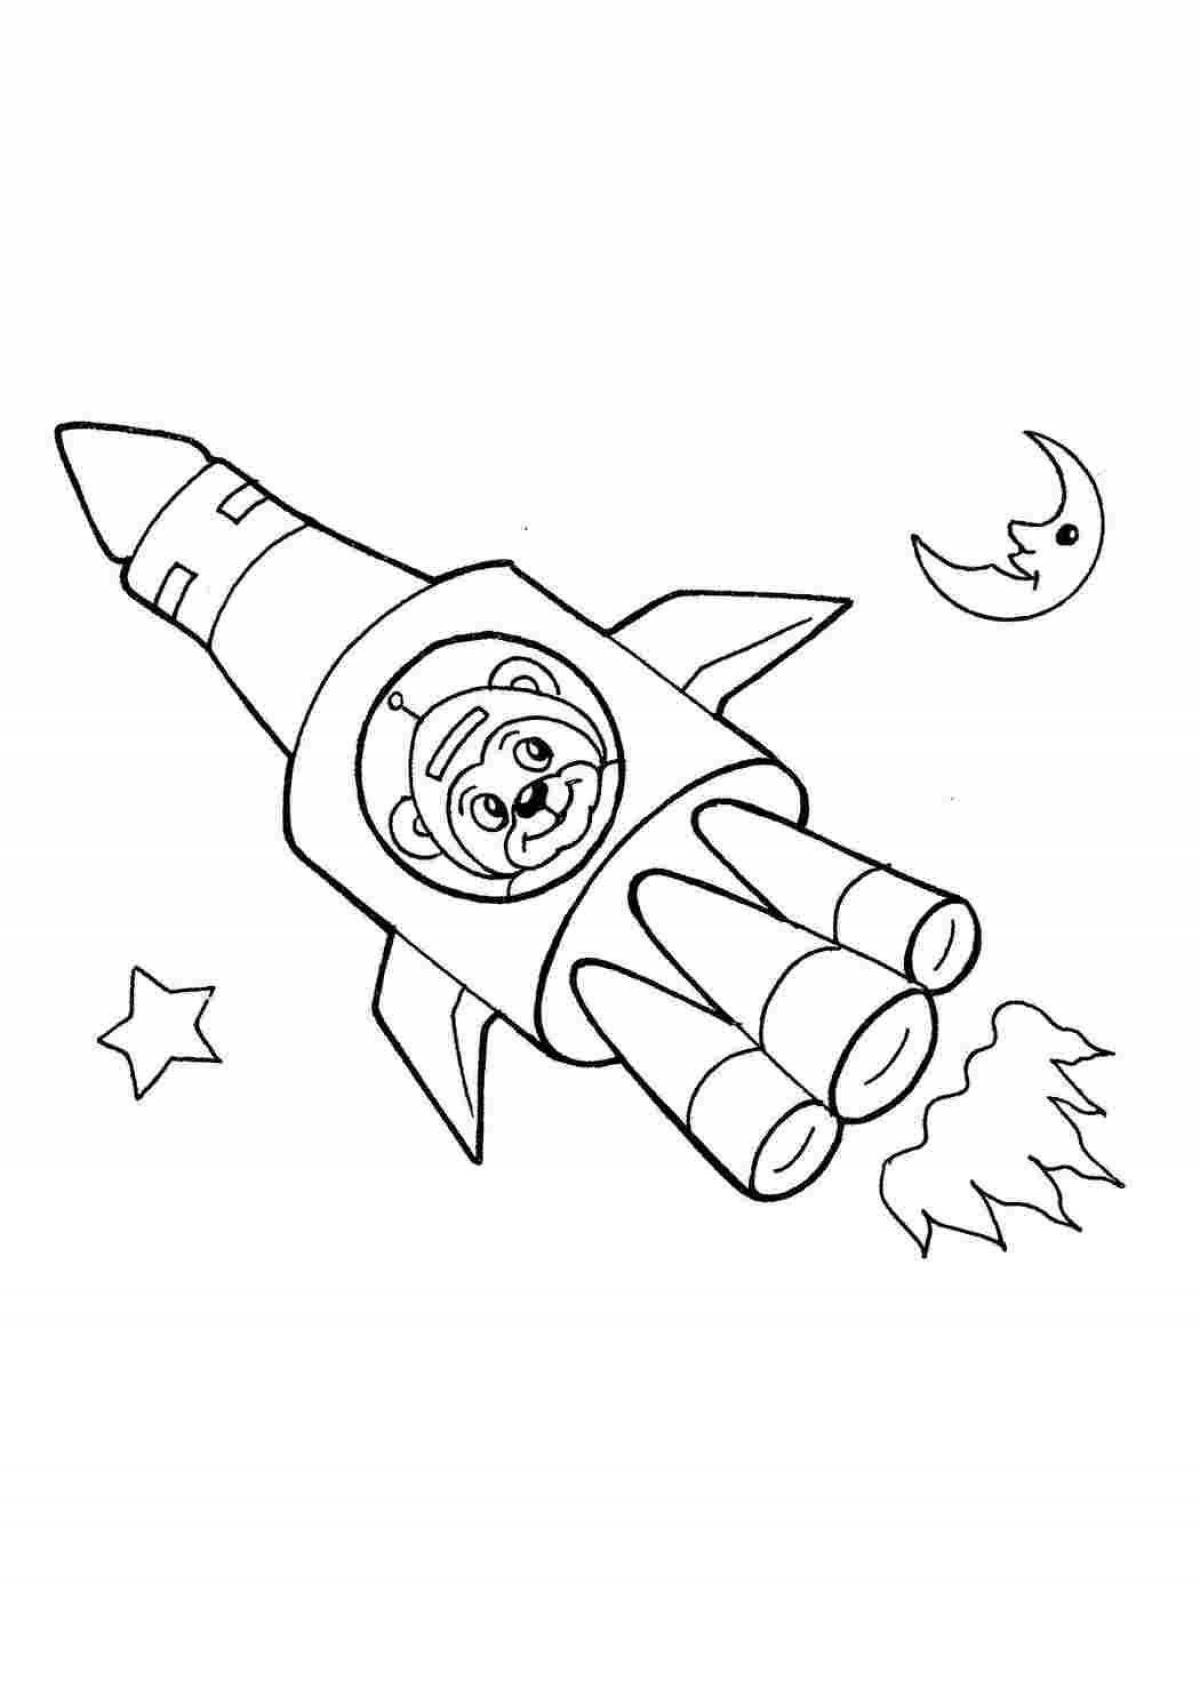 Fun rockets in space for kids